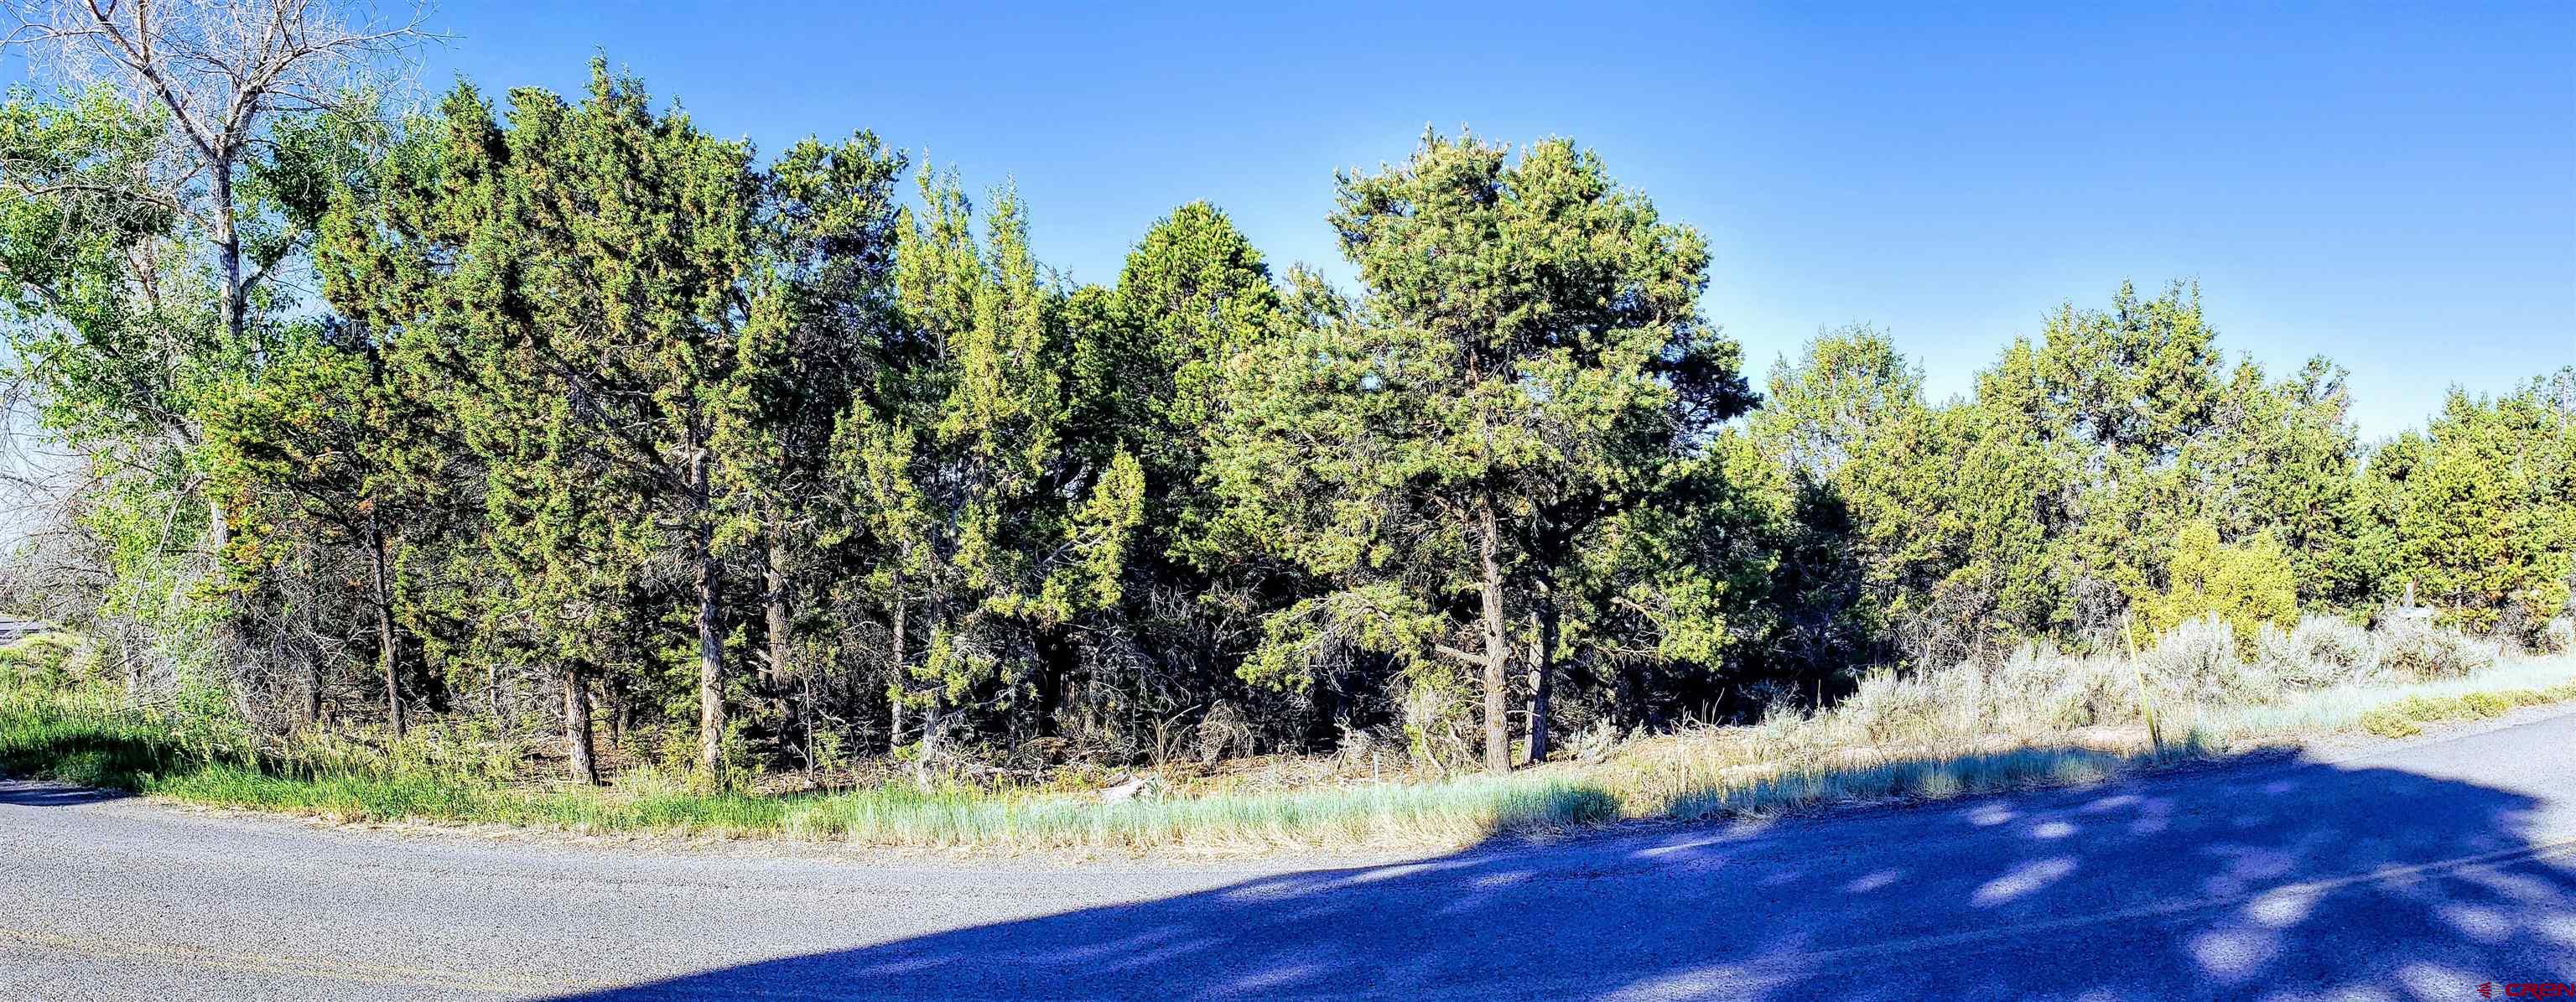 PRISTINE PARCEL OF LAND – 34.67 ACRES! Check out this Pristine & Treed Parcel of Land on Top of Cedar Mesa in Cedaredge. 34.67 Acres of Land, Ready for you to Build a Dream on a Mountain Top. Located in a Setting that Offers Views, Privacy and Seclusion, with Paved County Road Access and only about 7 Minutes from Town. Water line runs along the road that borders the property. Water Tap is Available from Upper Surface Creek Domestic. Natural Gas Line runs across the road from the property, or if you don't want to hook into that, you can use propane.  According to Elevate Fiber Internet's Website, this area on Cedar Mesa has High Speed Elevate Internet available, but Buyer should verify that. Elevation is approximately 7,000 feet.